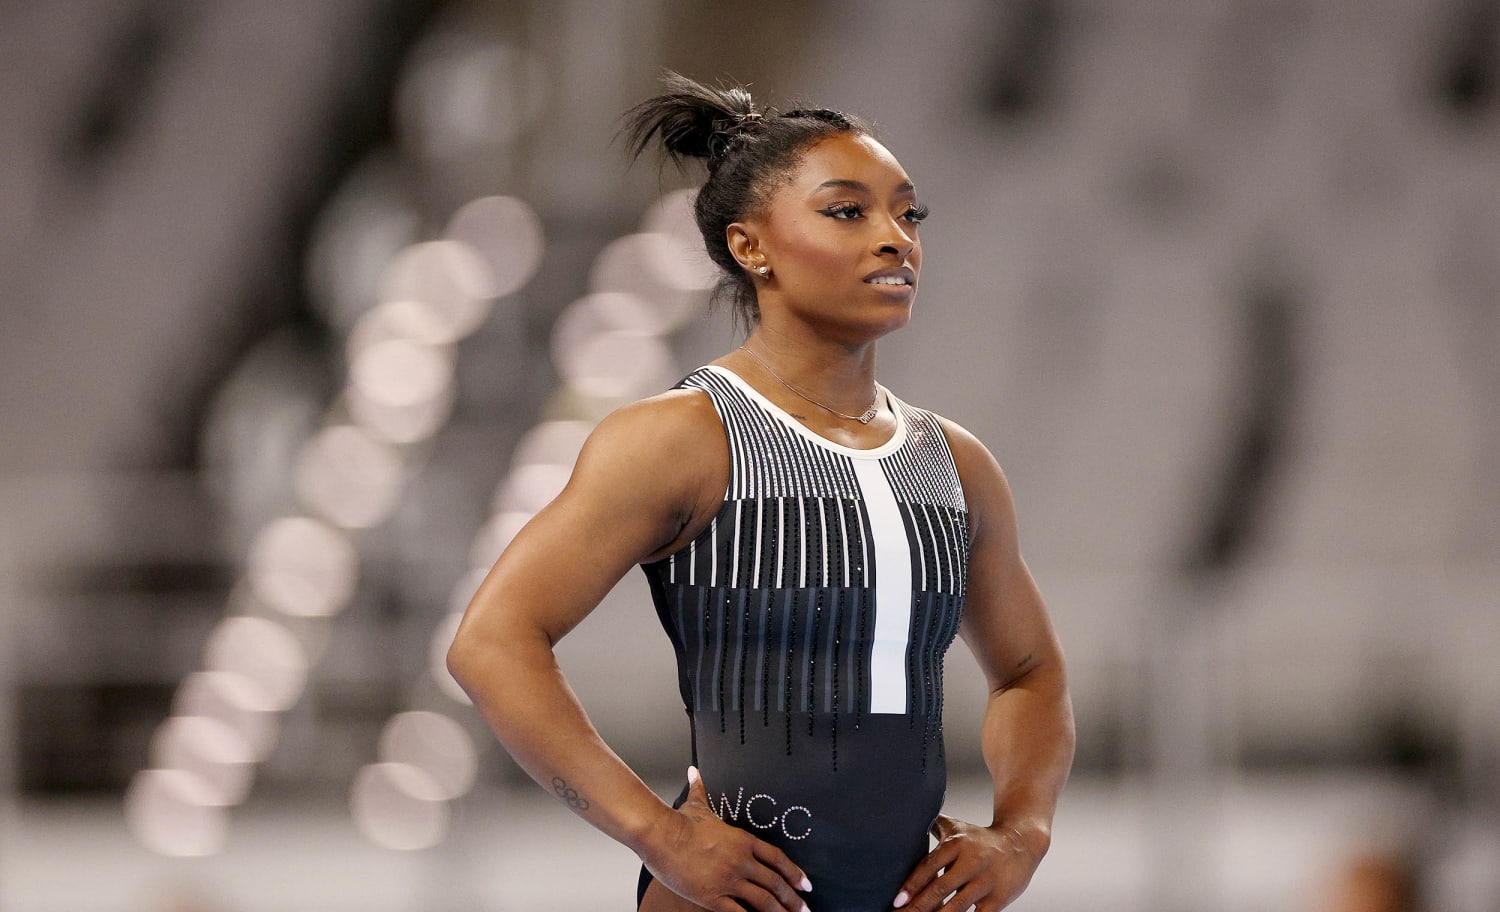 ‘The important thing’ Simone Biles’ mom wants her daughter to know before the Paris Olympics